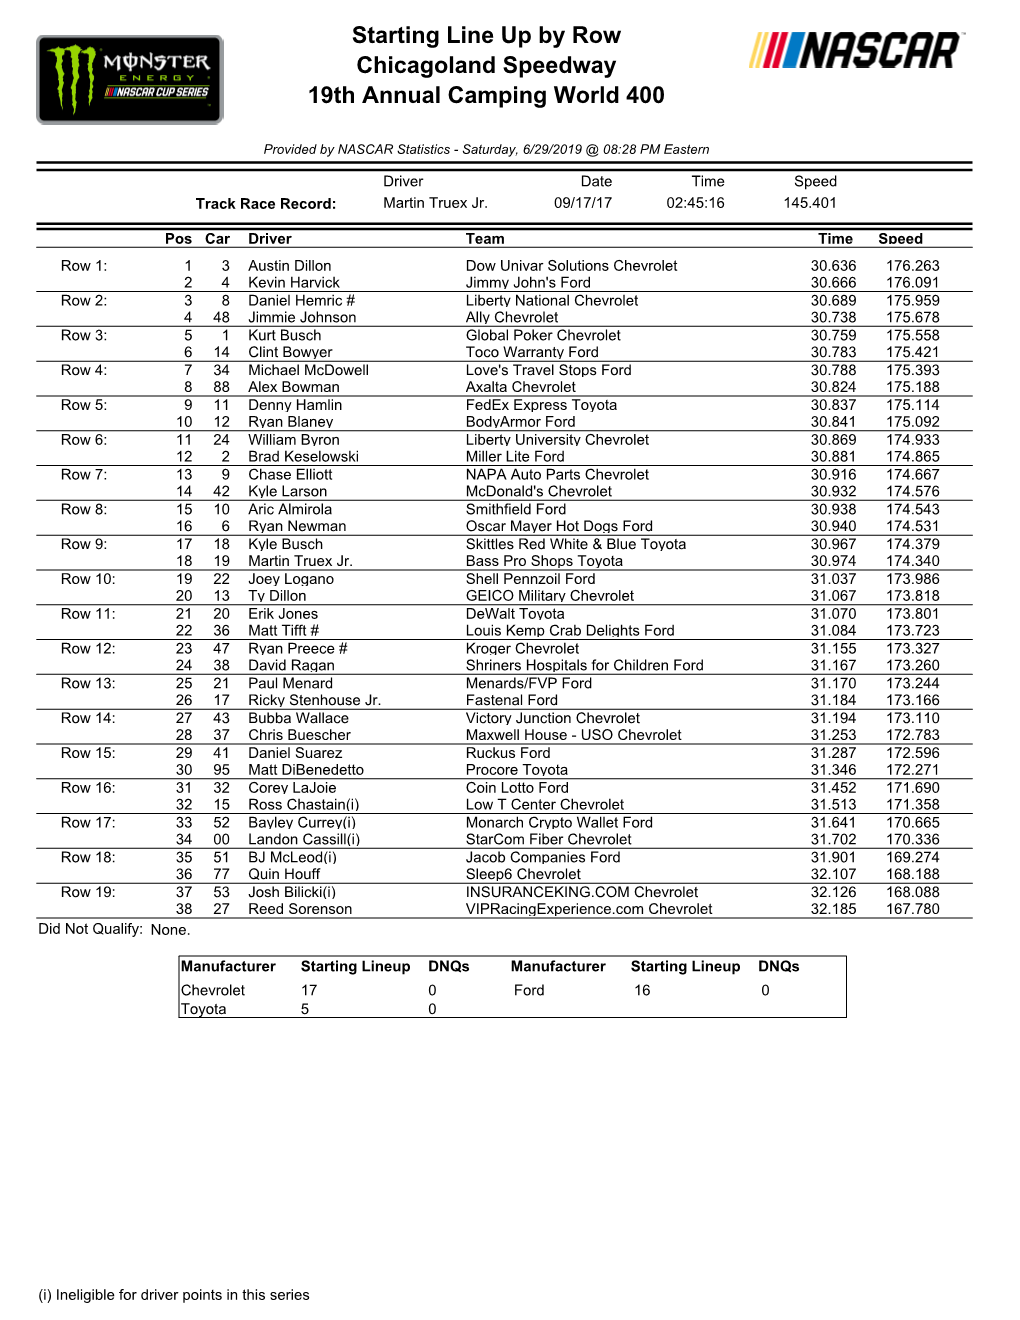 Starting Lineup Dnqs Manufacturer Starting Lineup Dnqs Chevrolet 17 0 Ford 16 0 Toyota 5 0